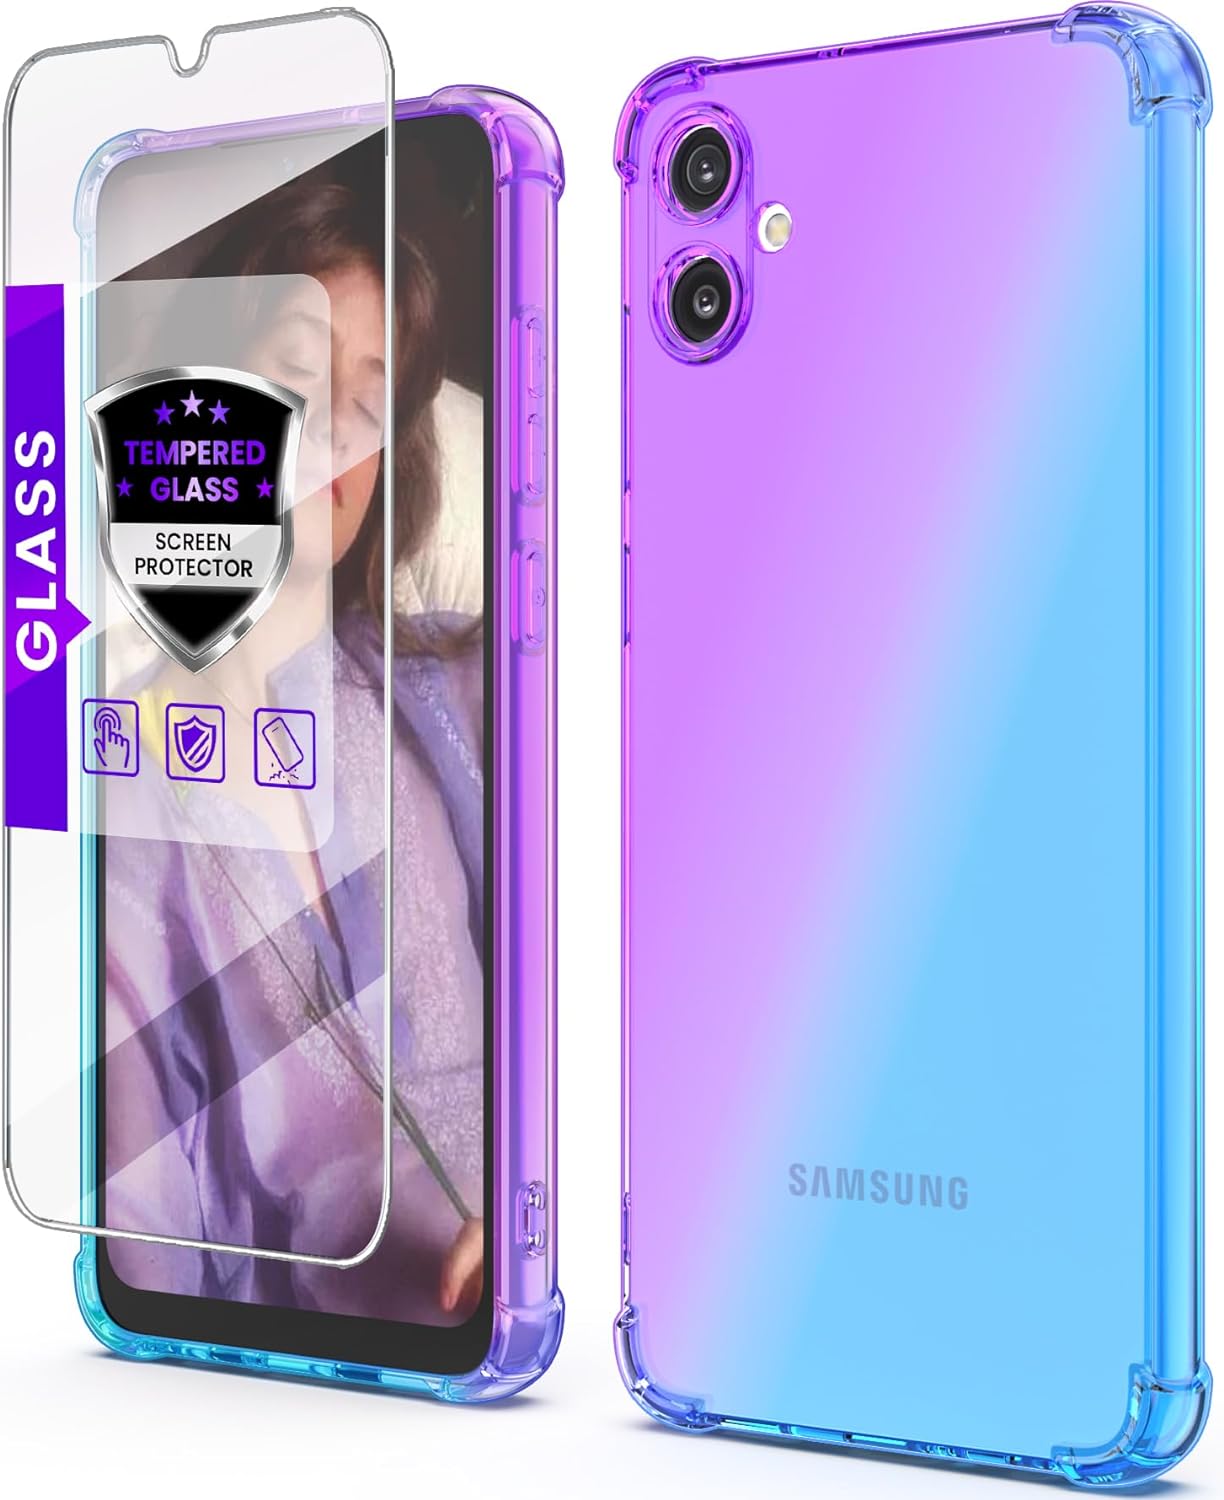 DagoRoo Samsung Galaxy A05 Case with Tempered Glass Screen Protector, Clear Gradient Slim Flexible -Blue Purple